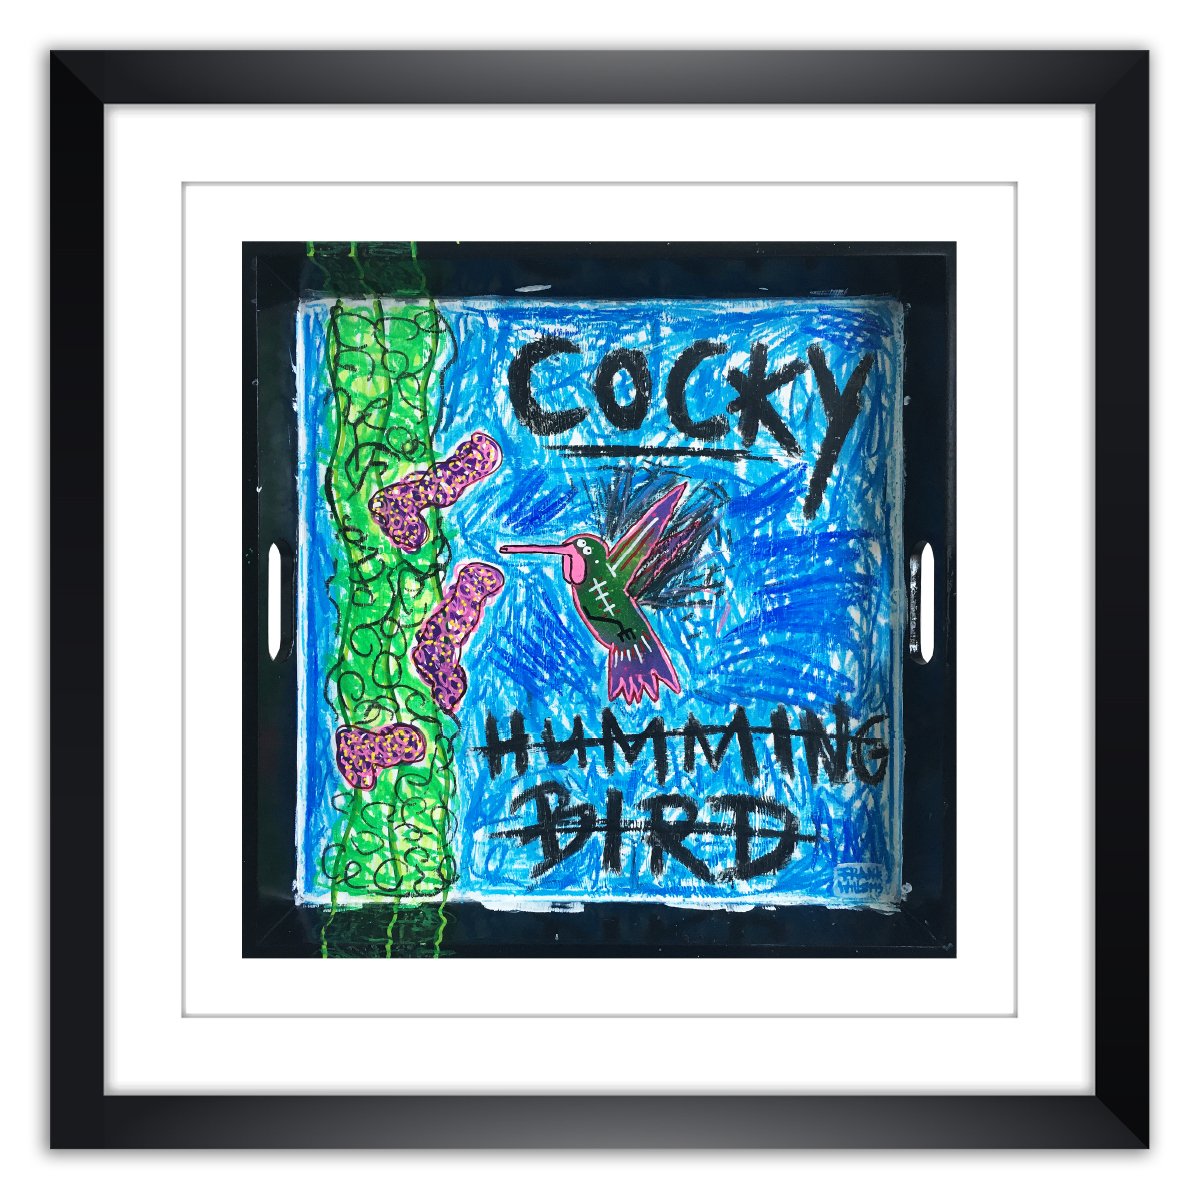 Limited prints - COCKY HUMMINGBIRD framed - Frank Willems